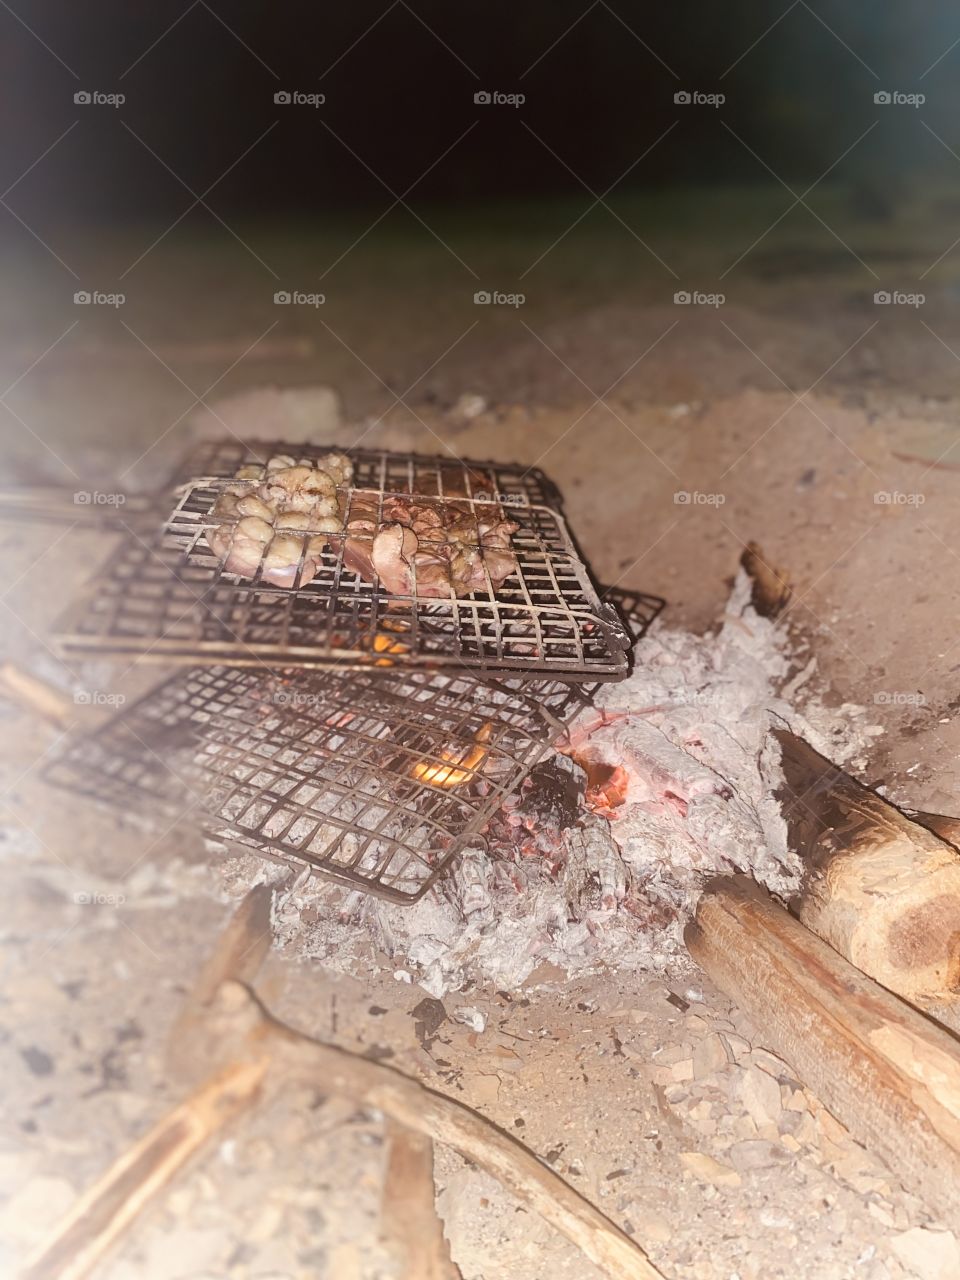 Barbecue party in my village on the occasion of the Saudi National Day